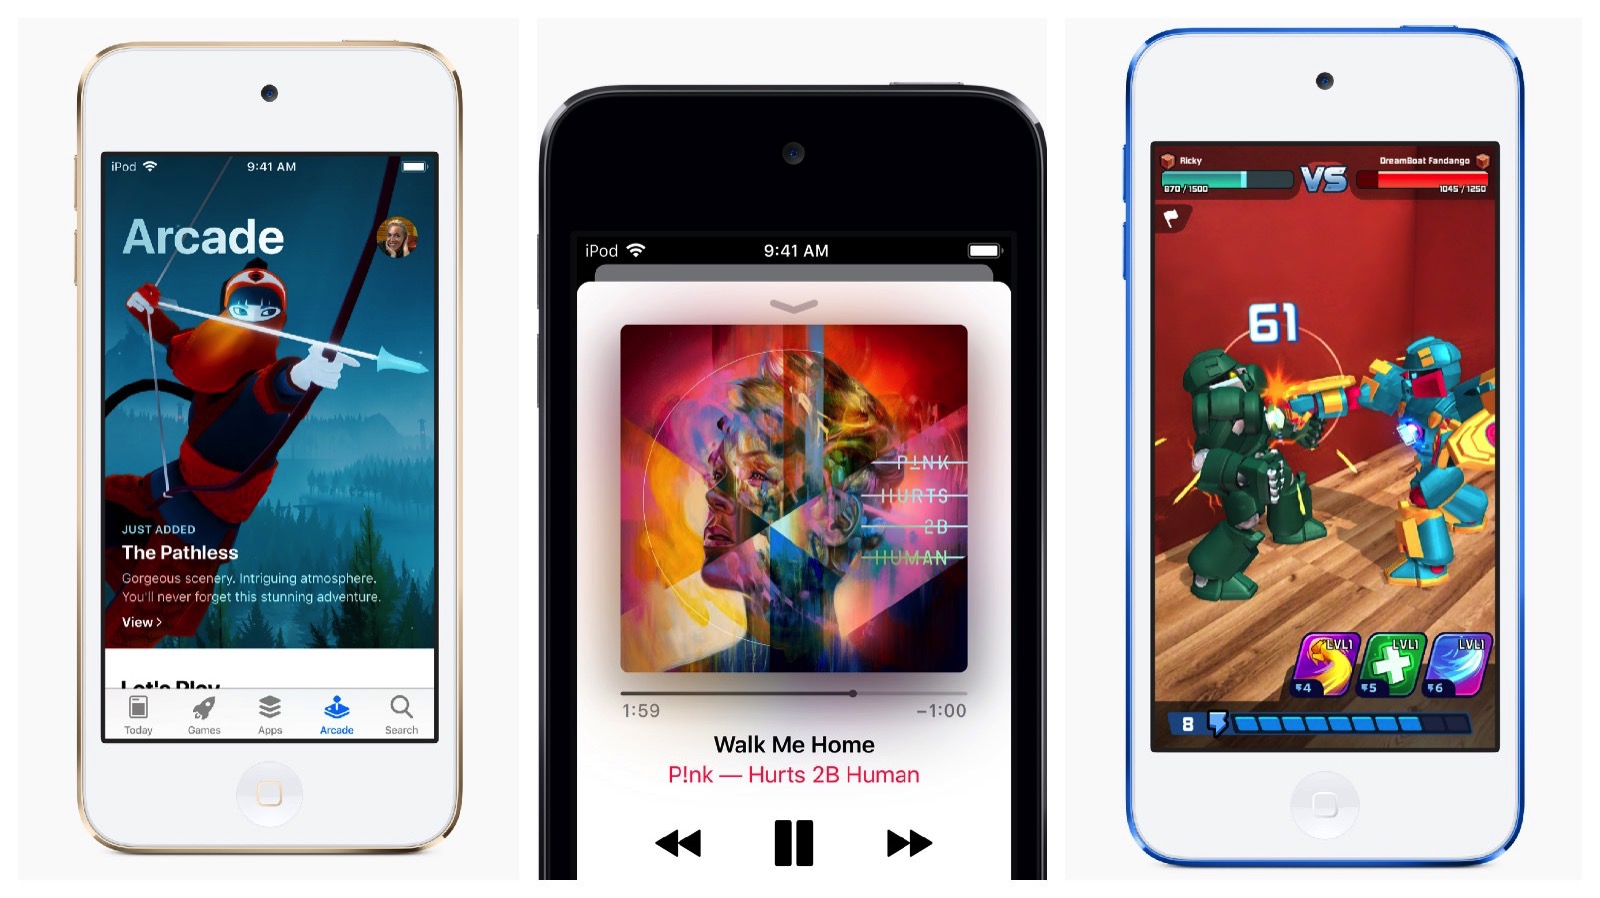 ipod-touch-is-for-applemusic-and-games.jpg